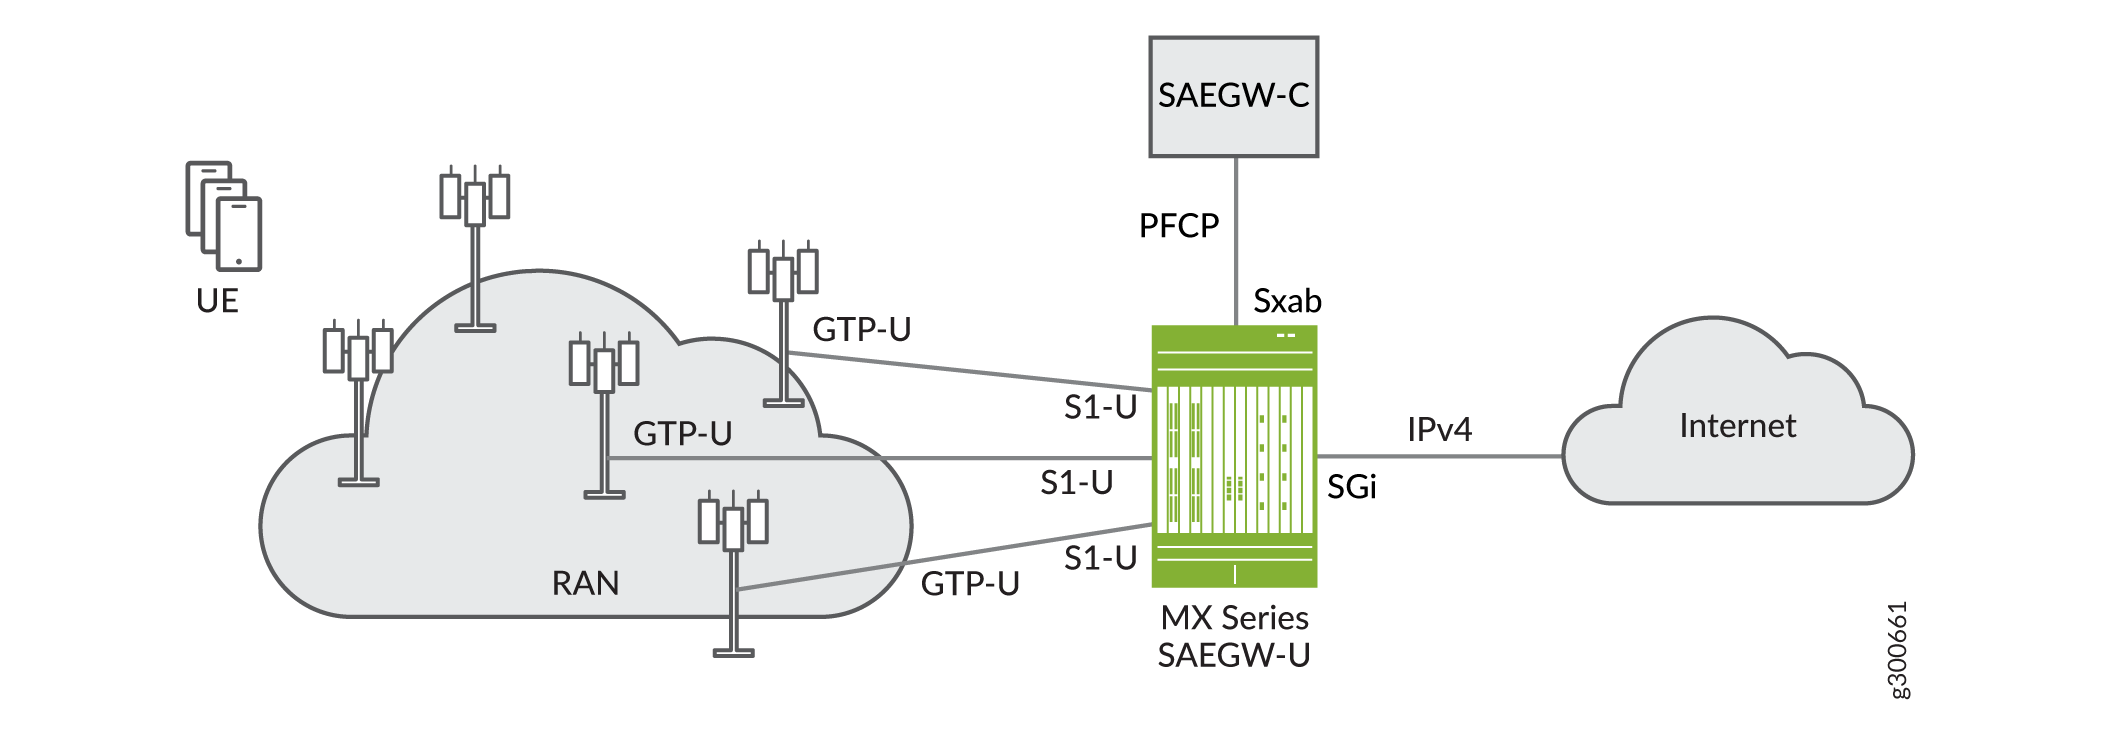 MX Series SAEGW-U in the CUPS Wireless Network Architecture